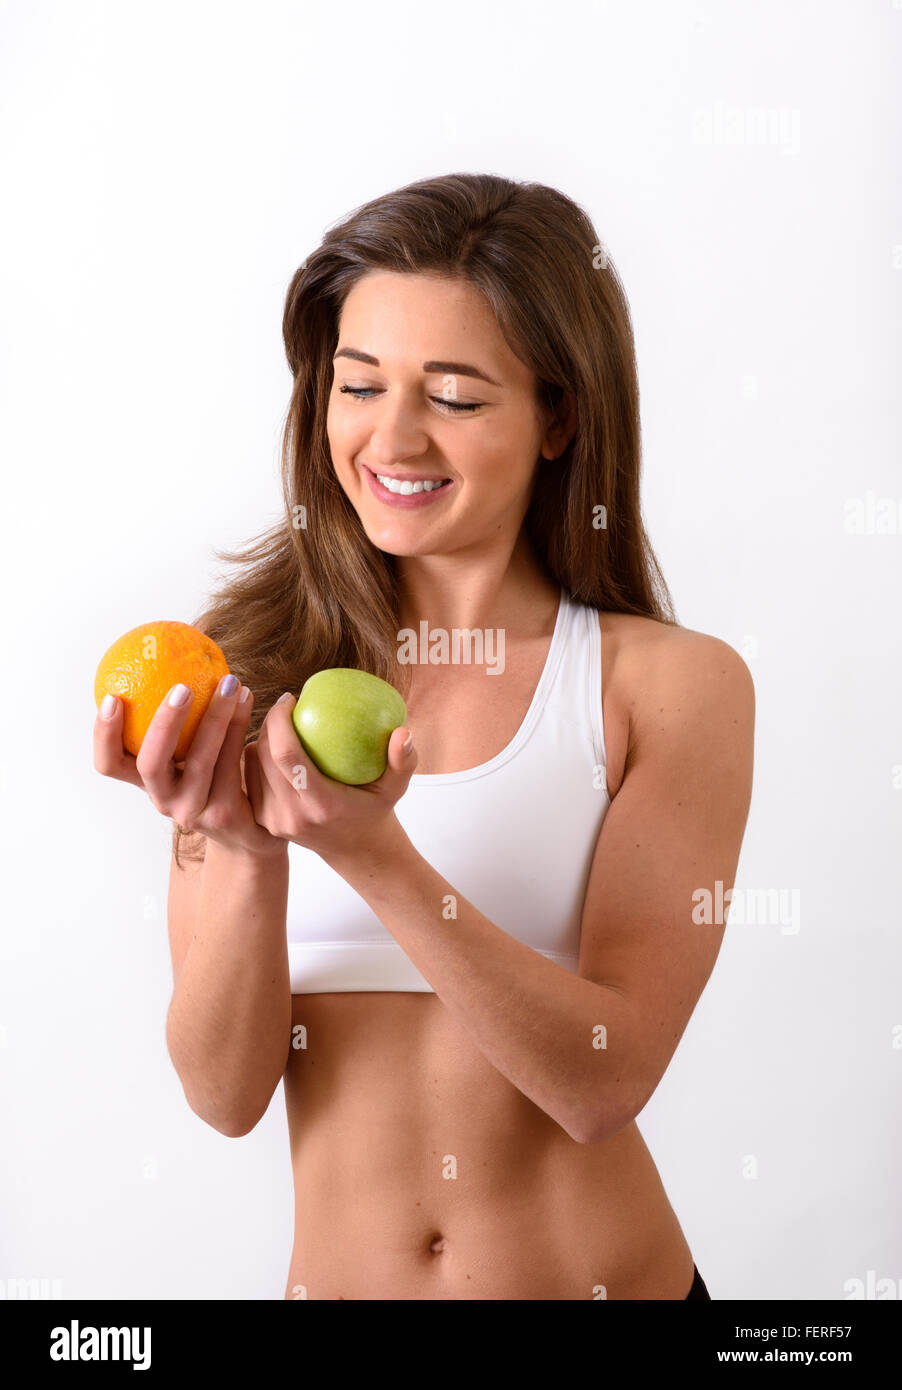 Young slim woman in sports top deciding between an orange and an apple Stock Photo